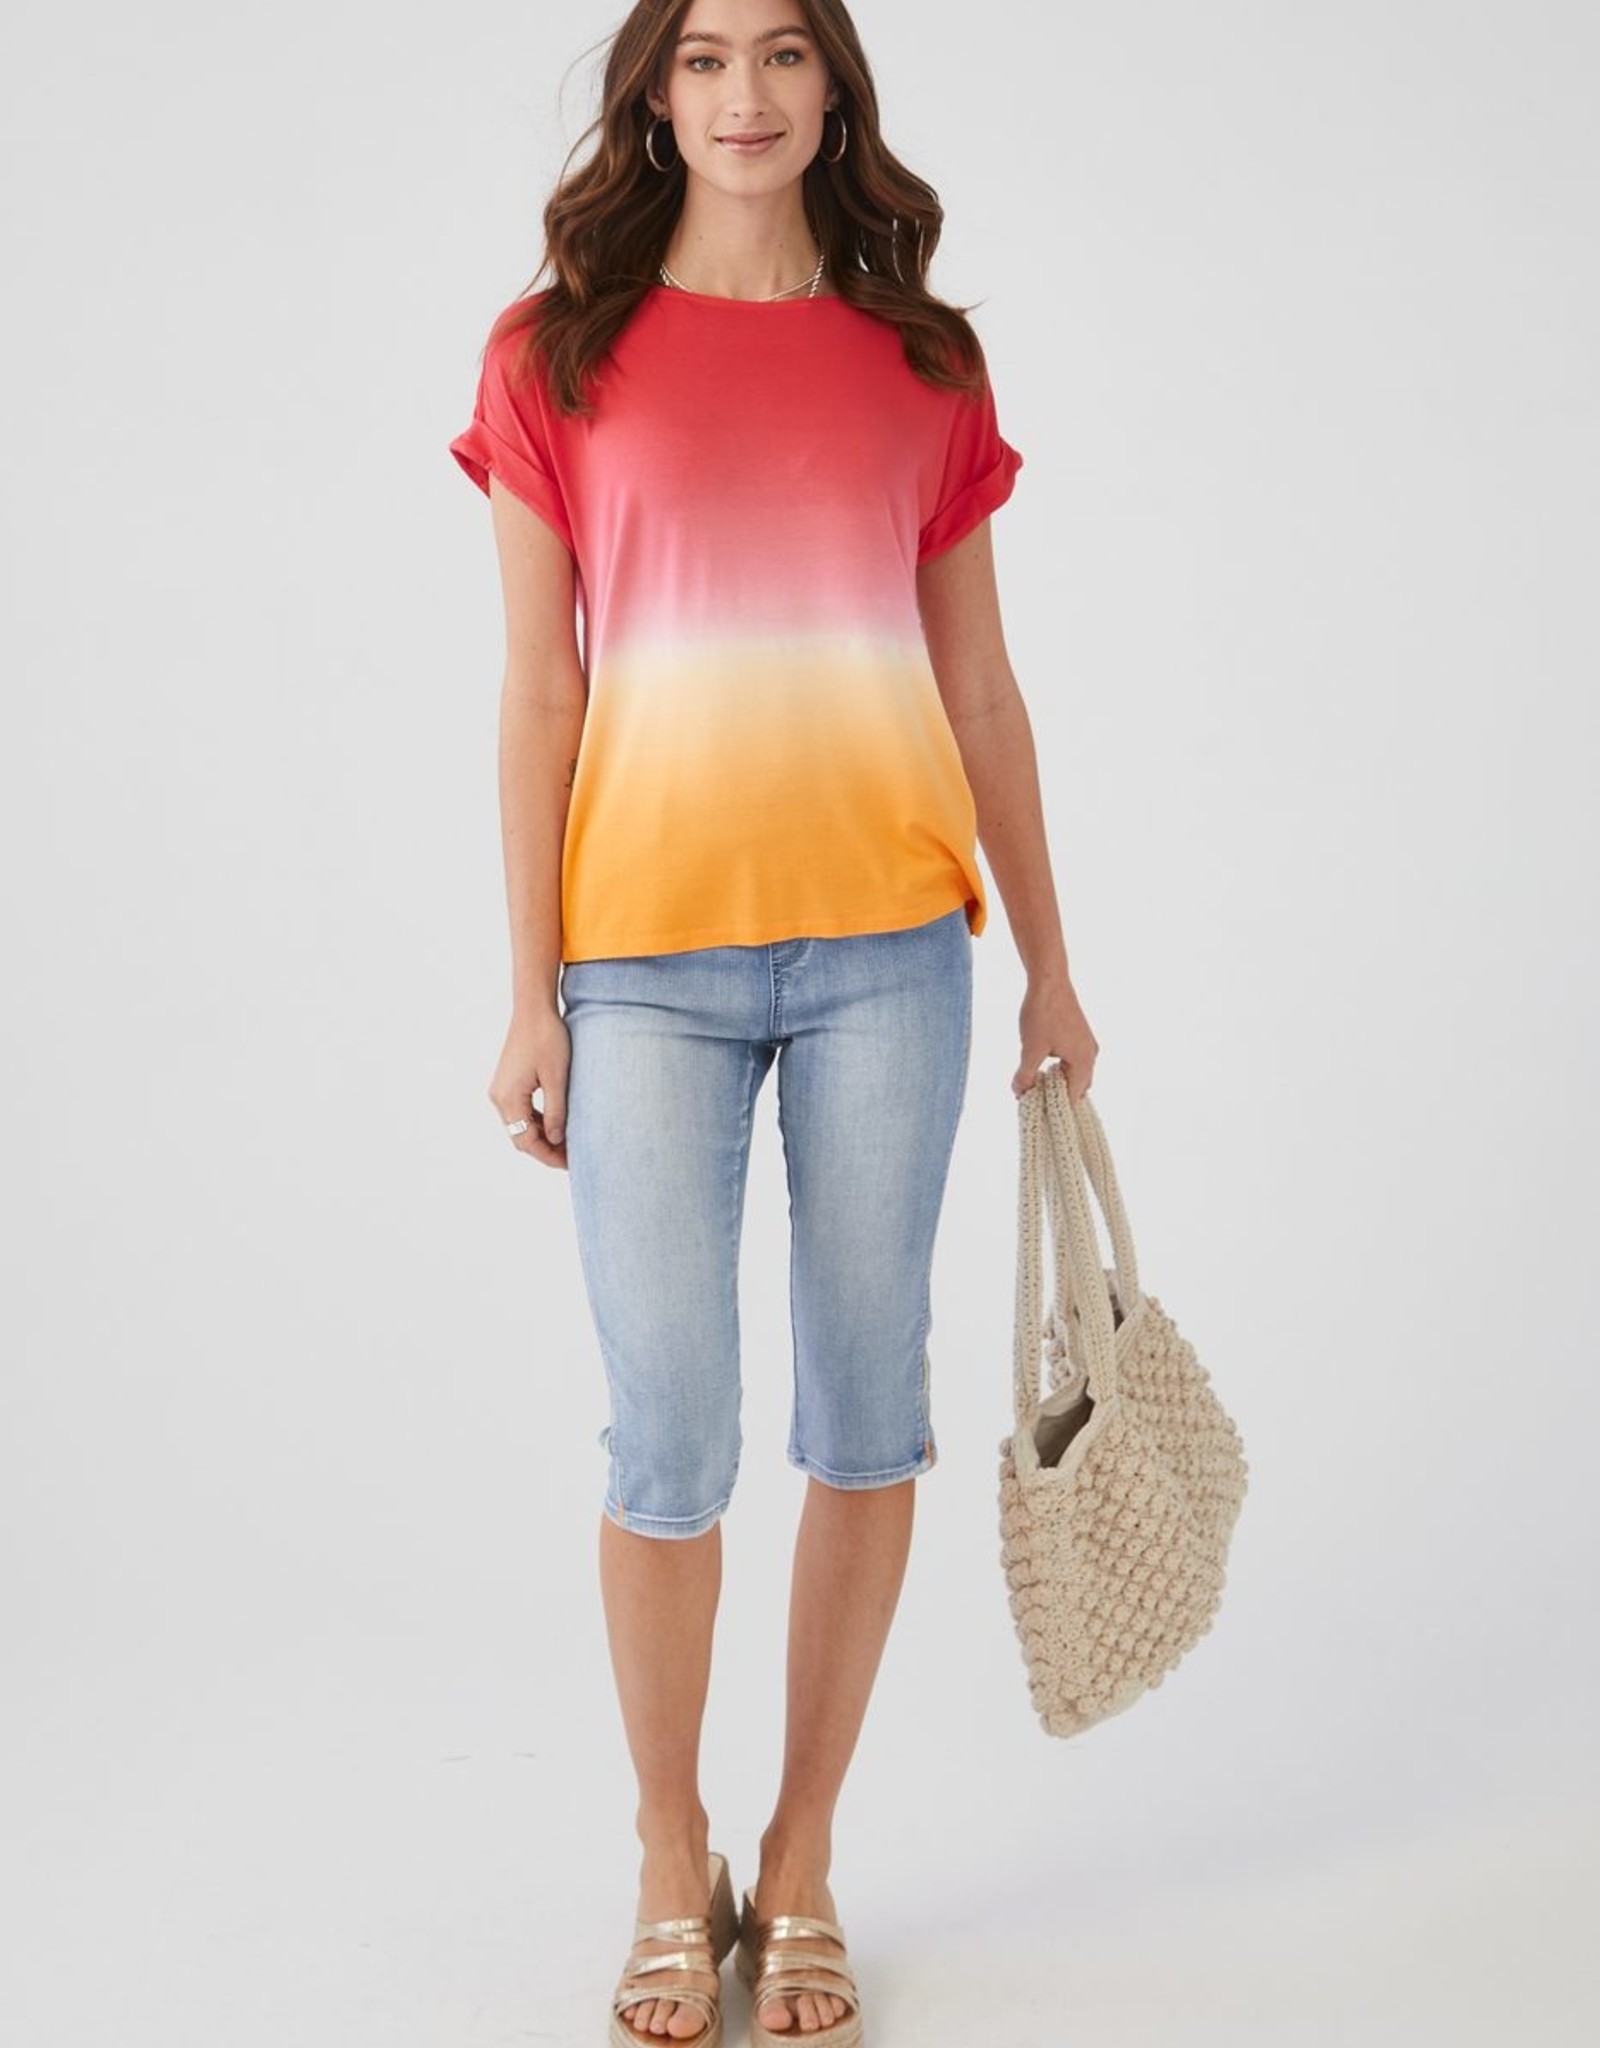 French Dressing Jeans FDJ dip dyed boatneck top 3000756